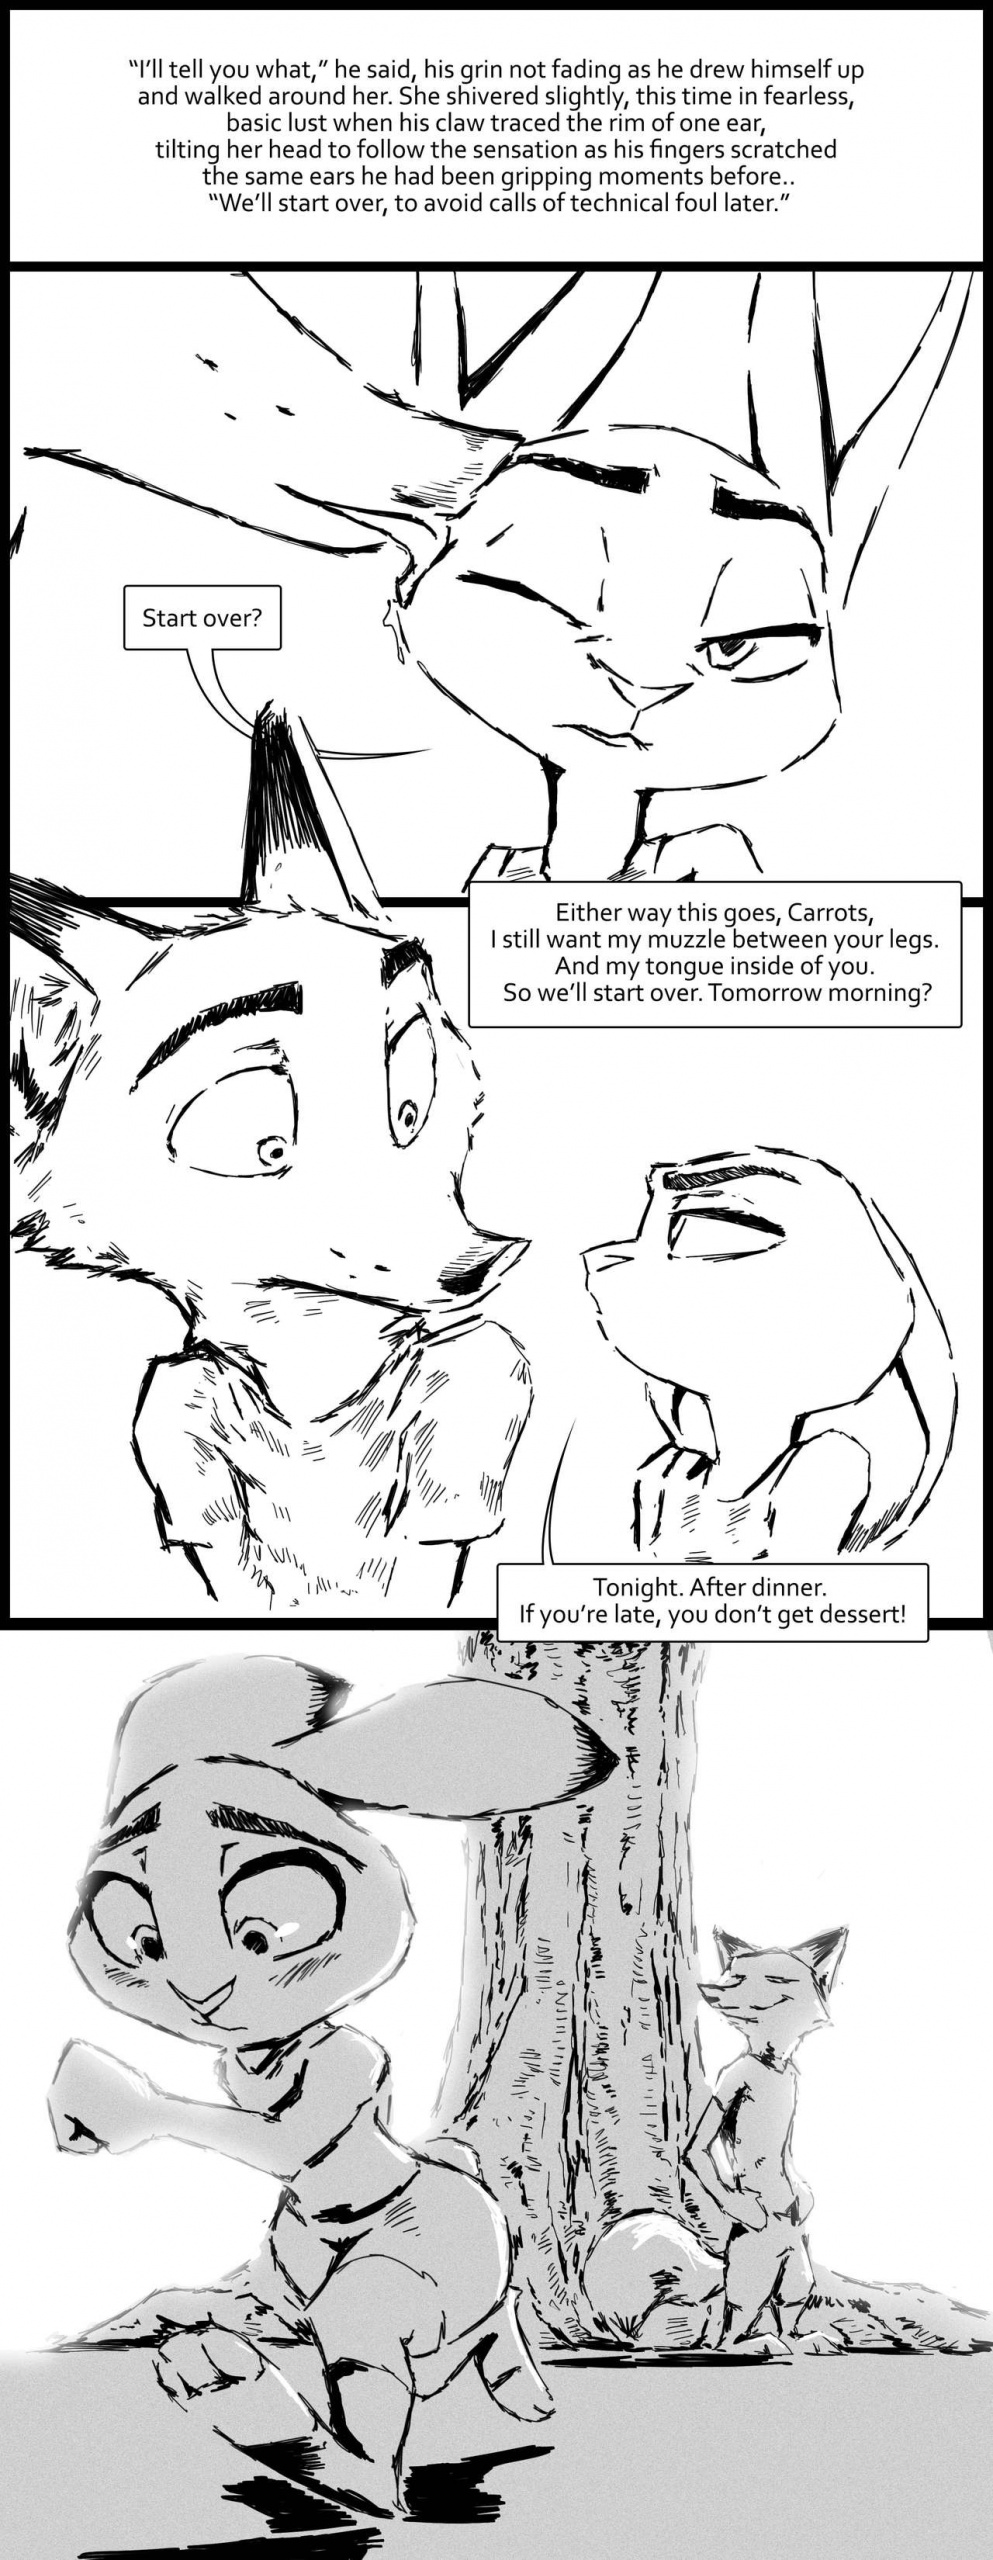 Wilde Academy - Chapter 2 porn comics Oral sex, Furry